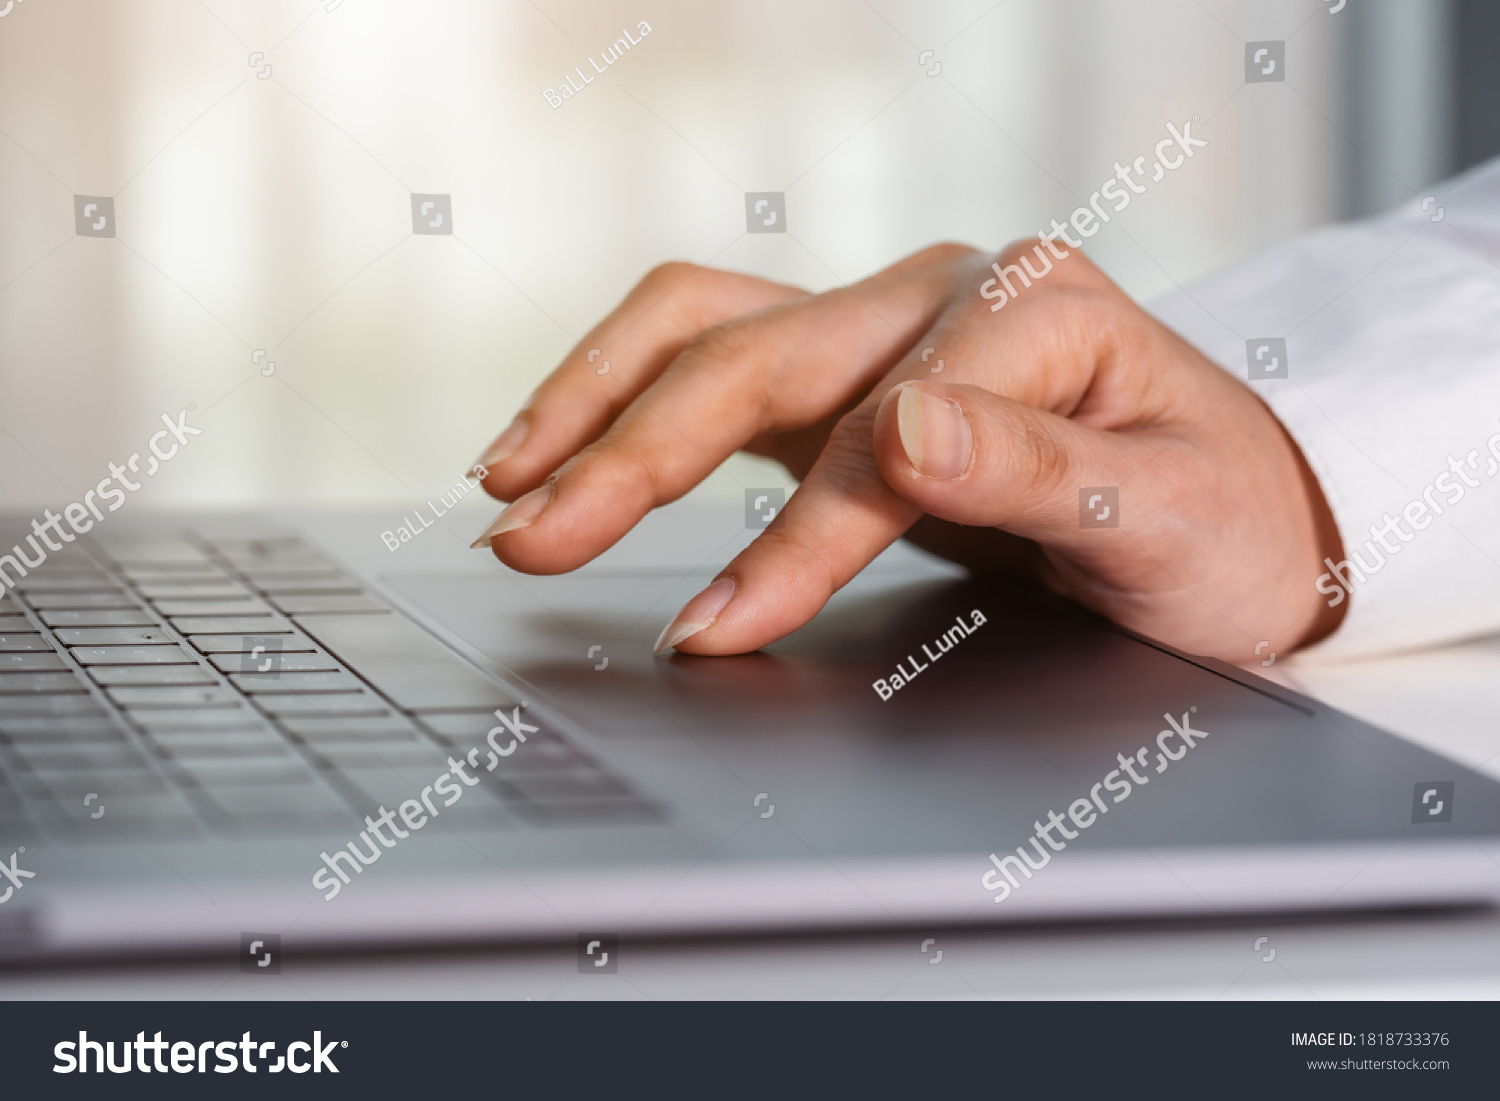 close-up female hand touching touchpad on a laptop computer #1818733376